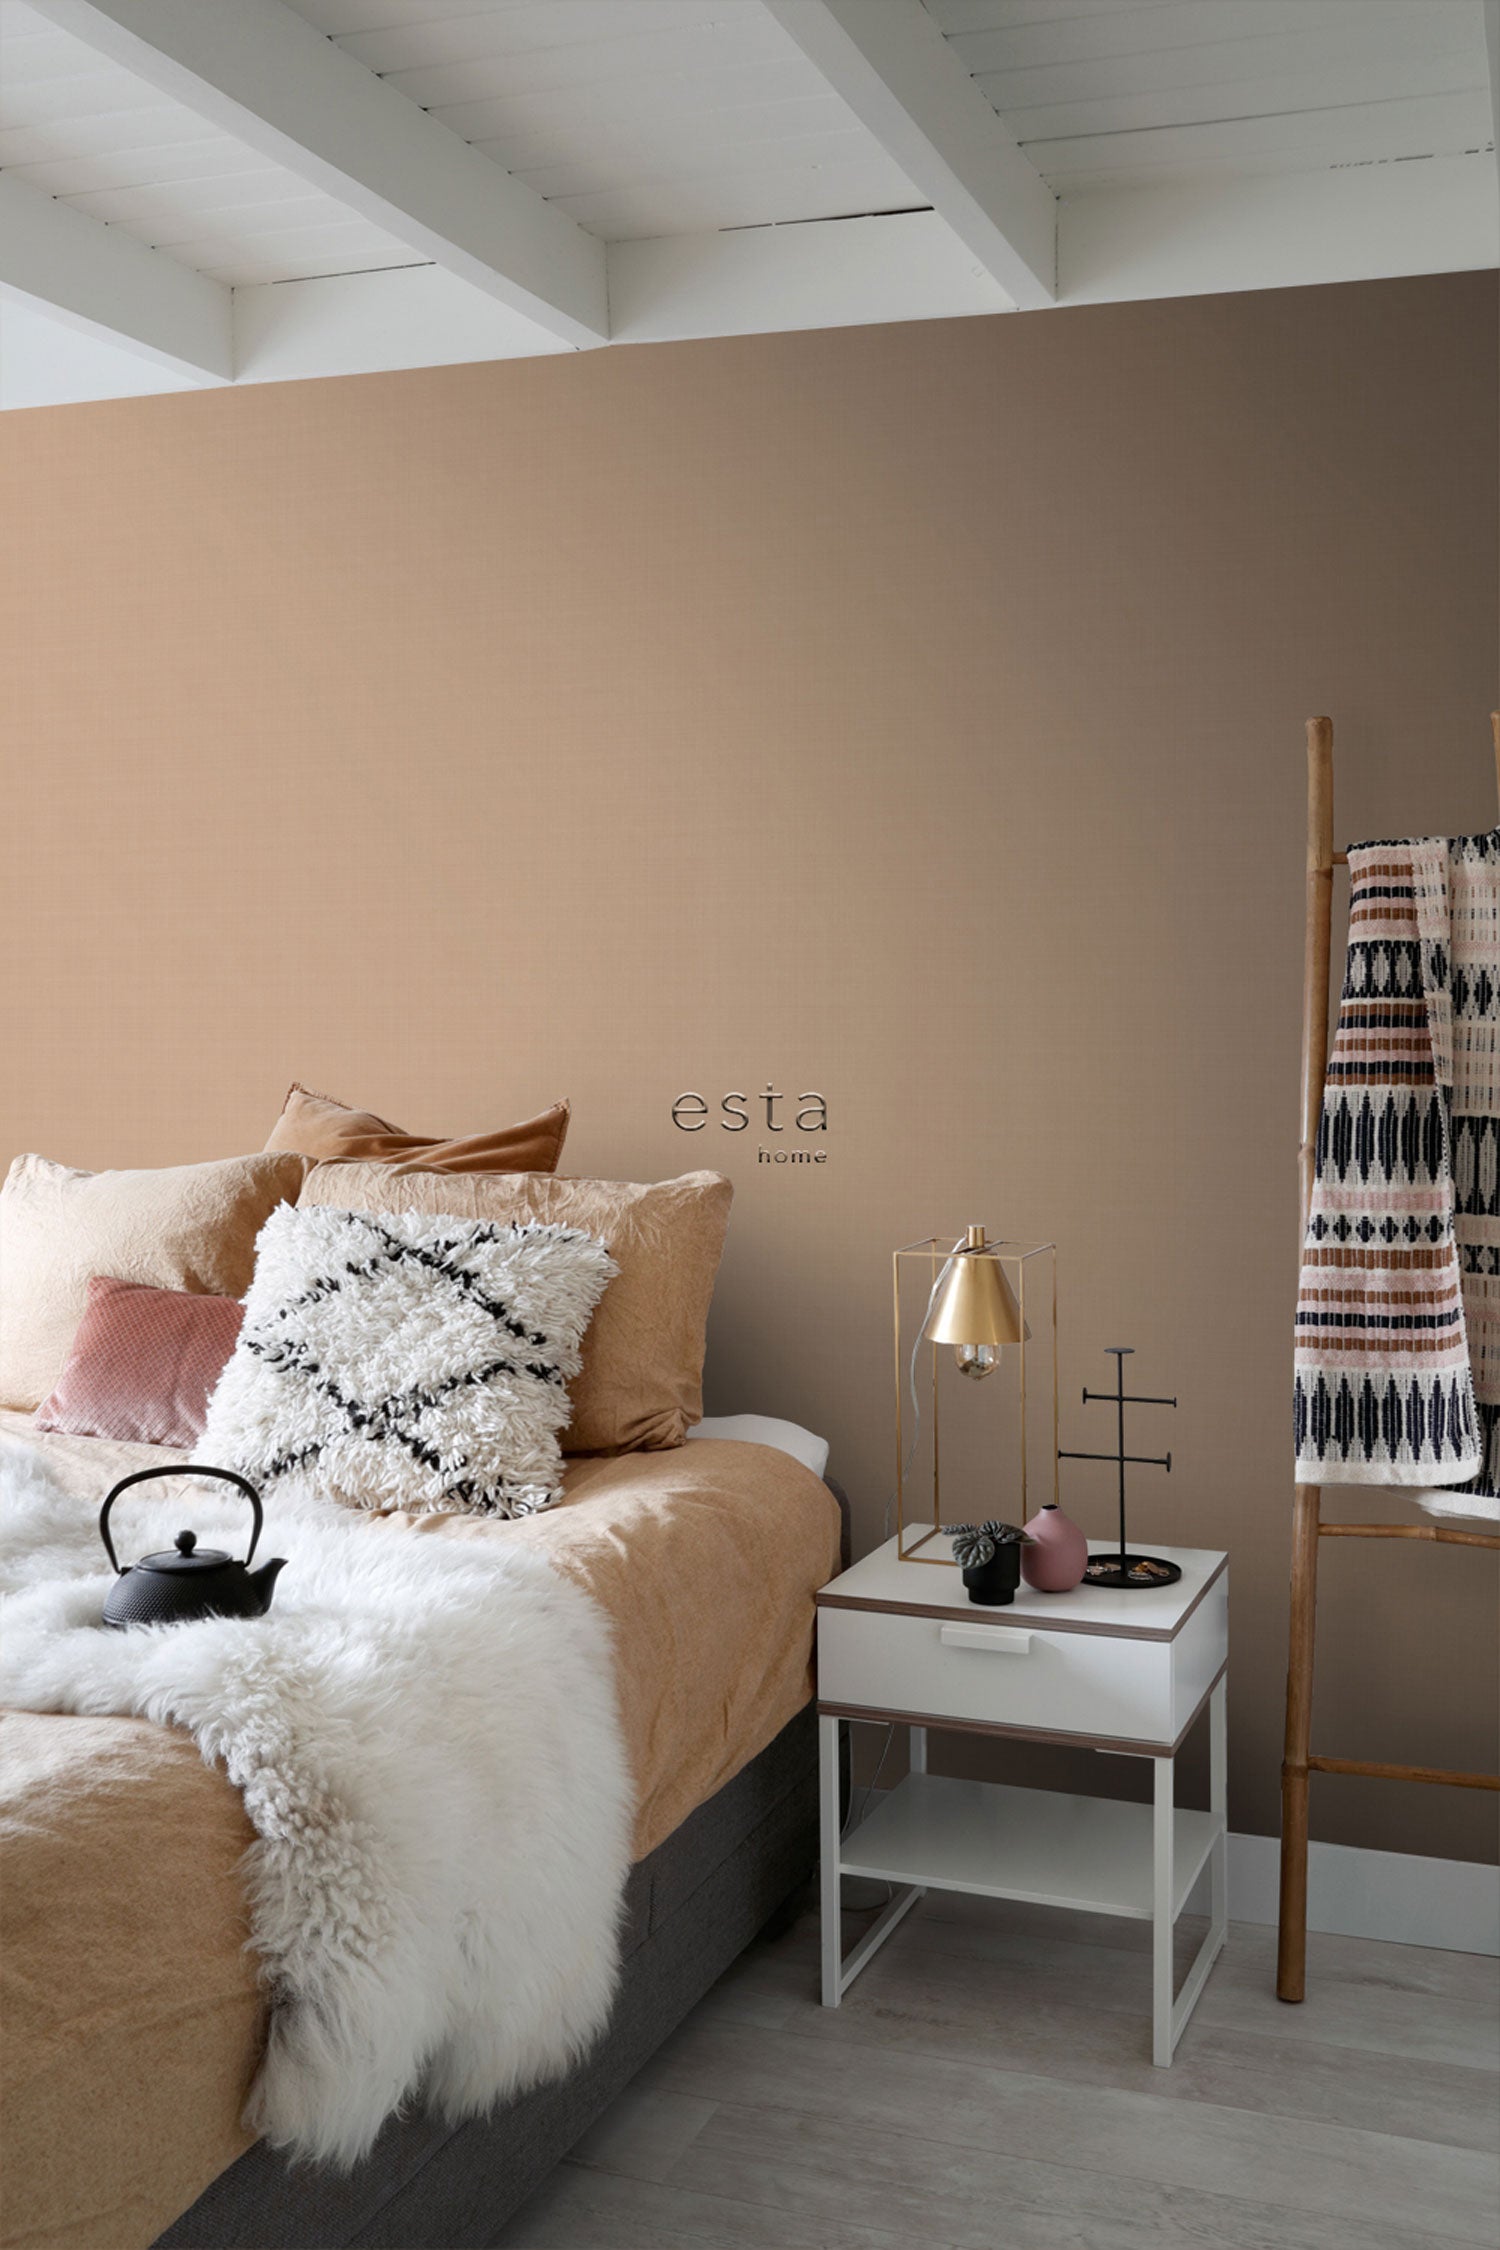 Brown non-woven wallpaper with a grid pattern 139473, To the Moon and Back, Esta Home